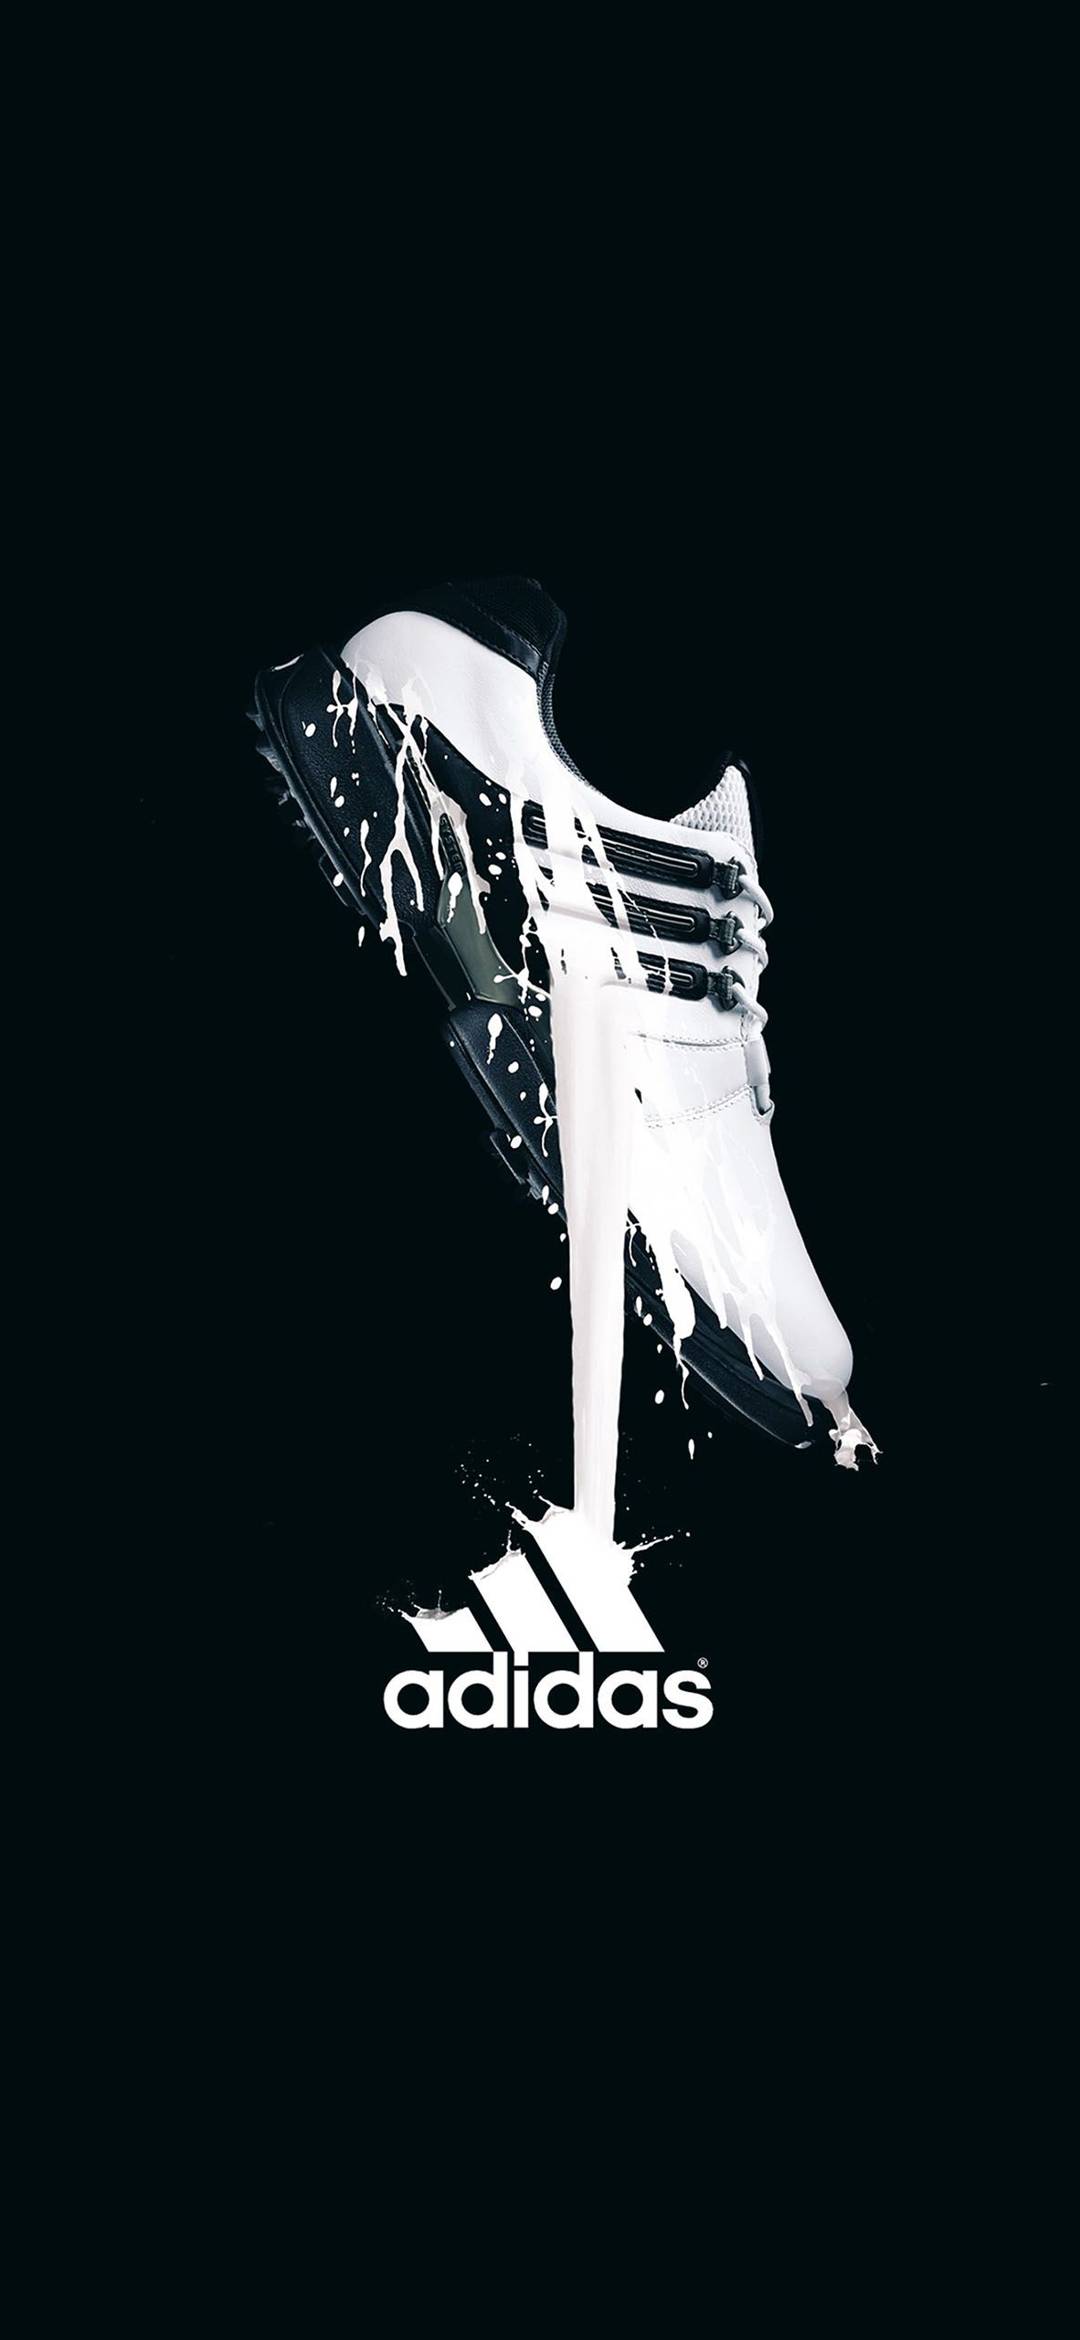 4k Wallpapers Of Adidas